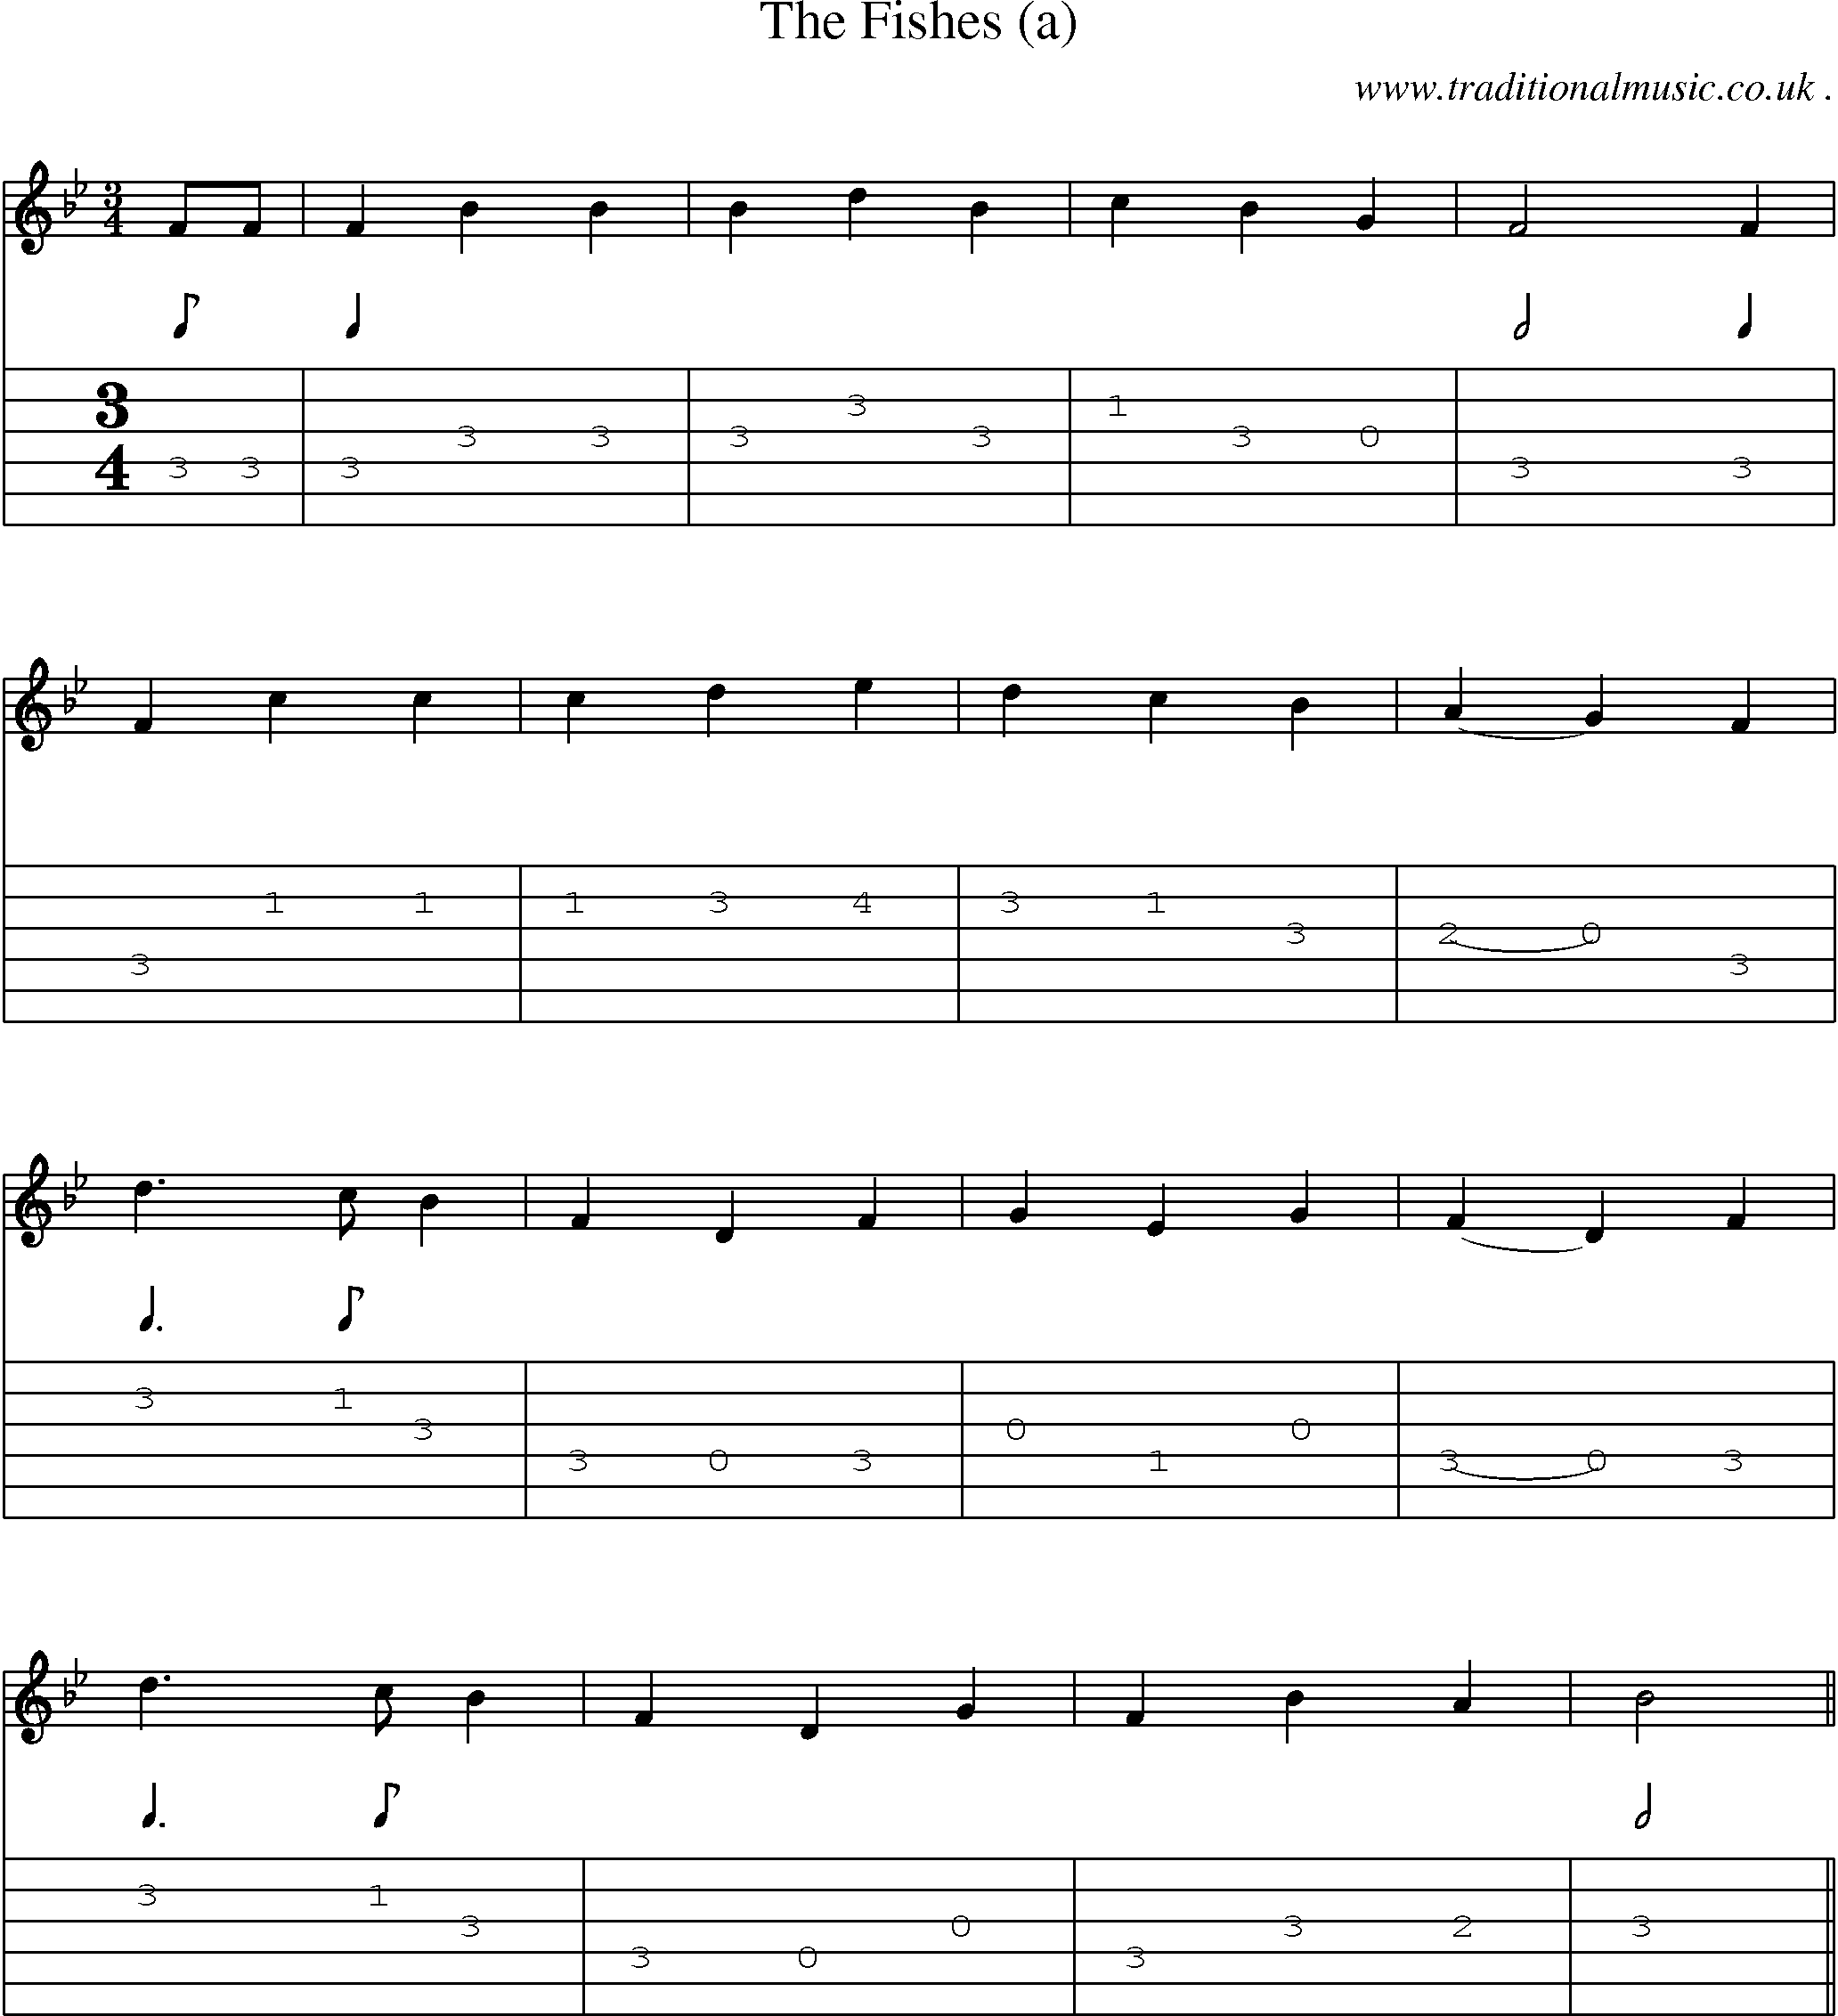 Sheet-Music and Guitar Tabs for The Fishes (a)